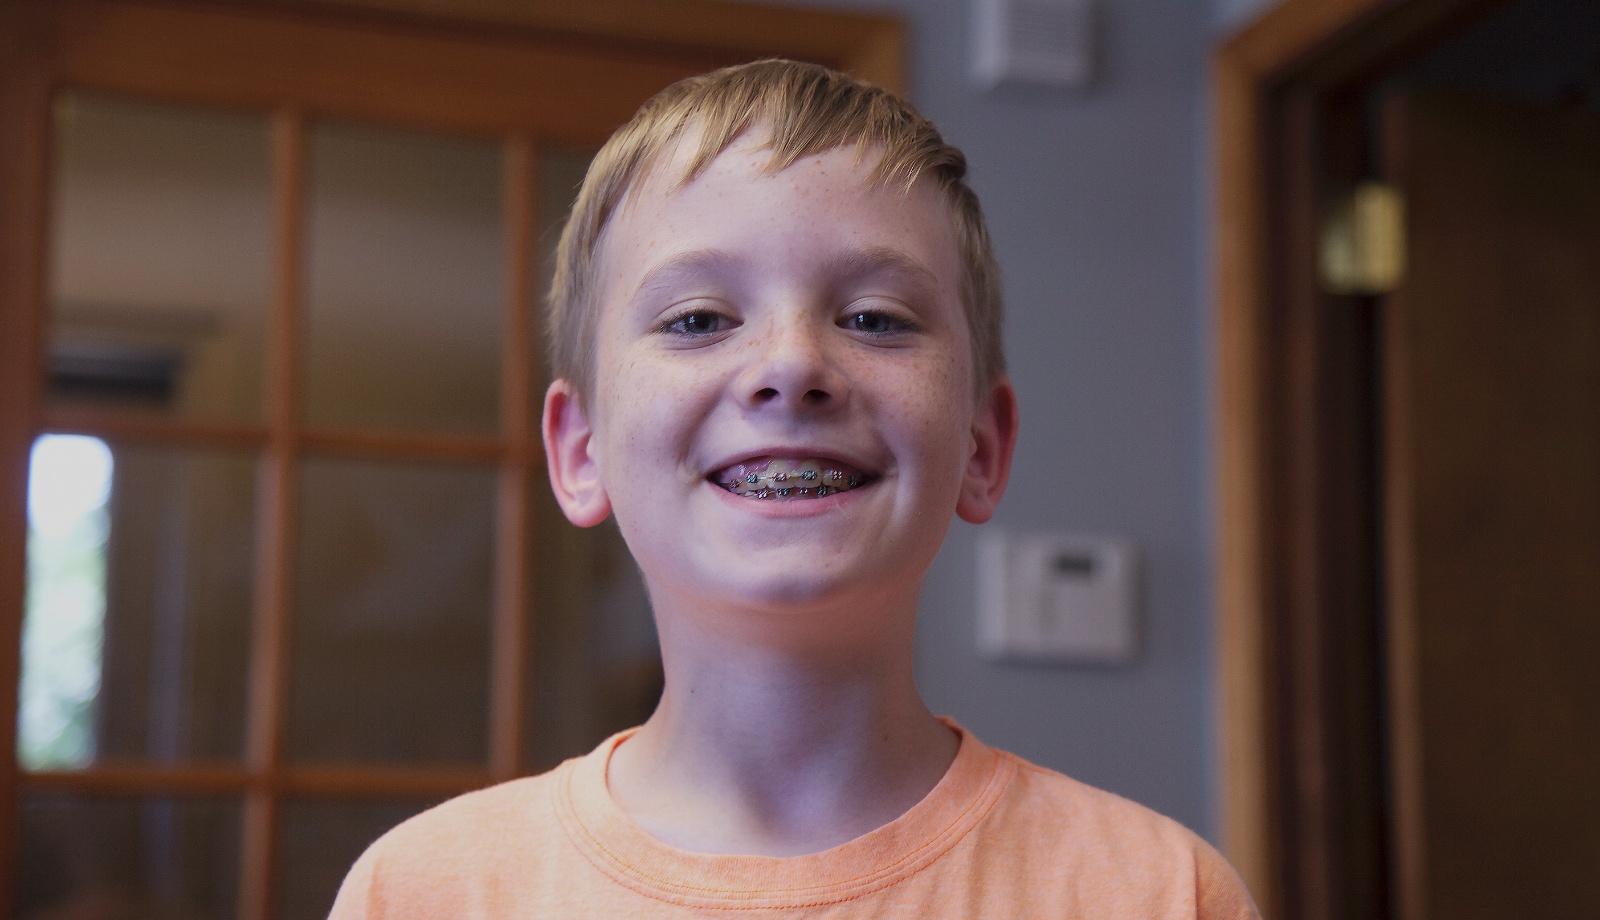 Smiling young boy with braces in Mount Holly